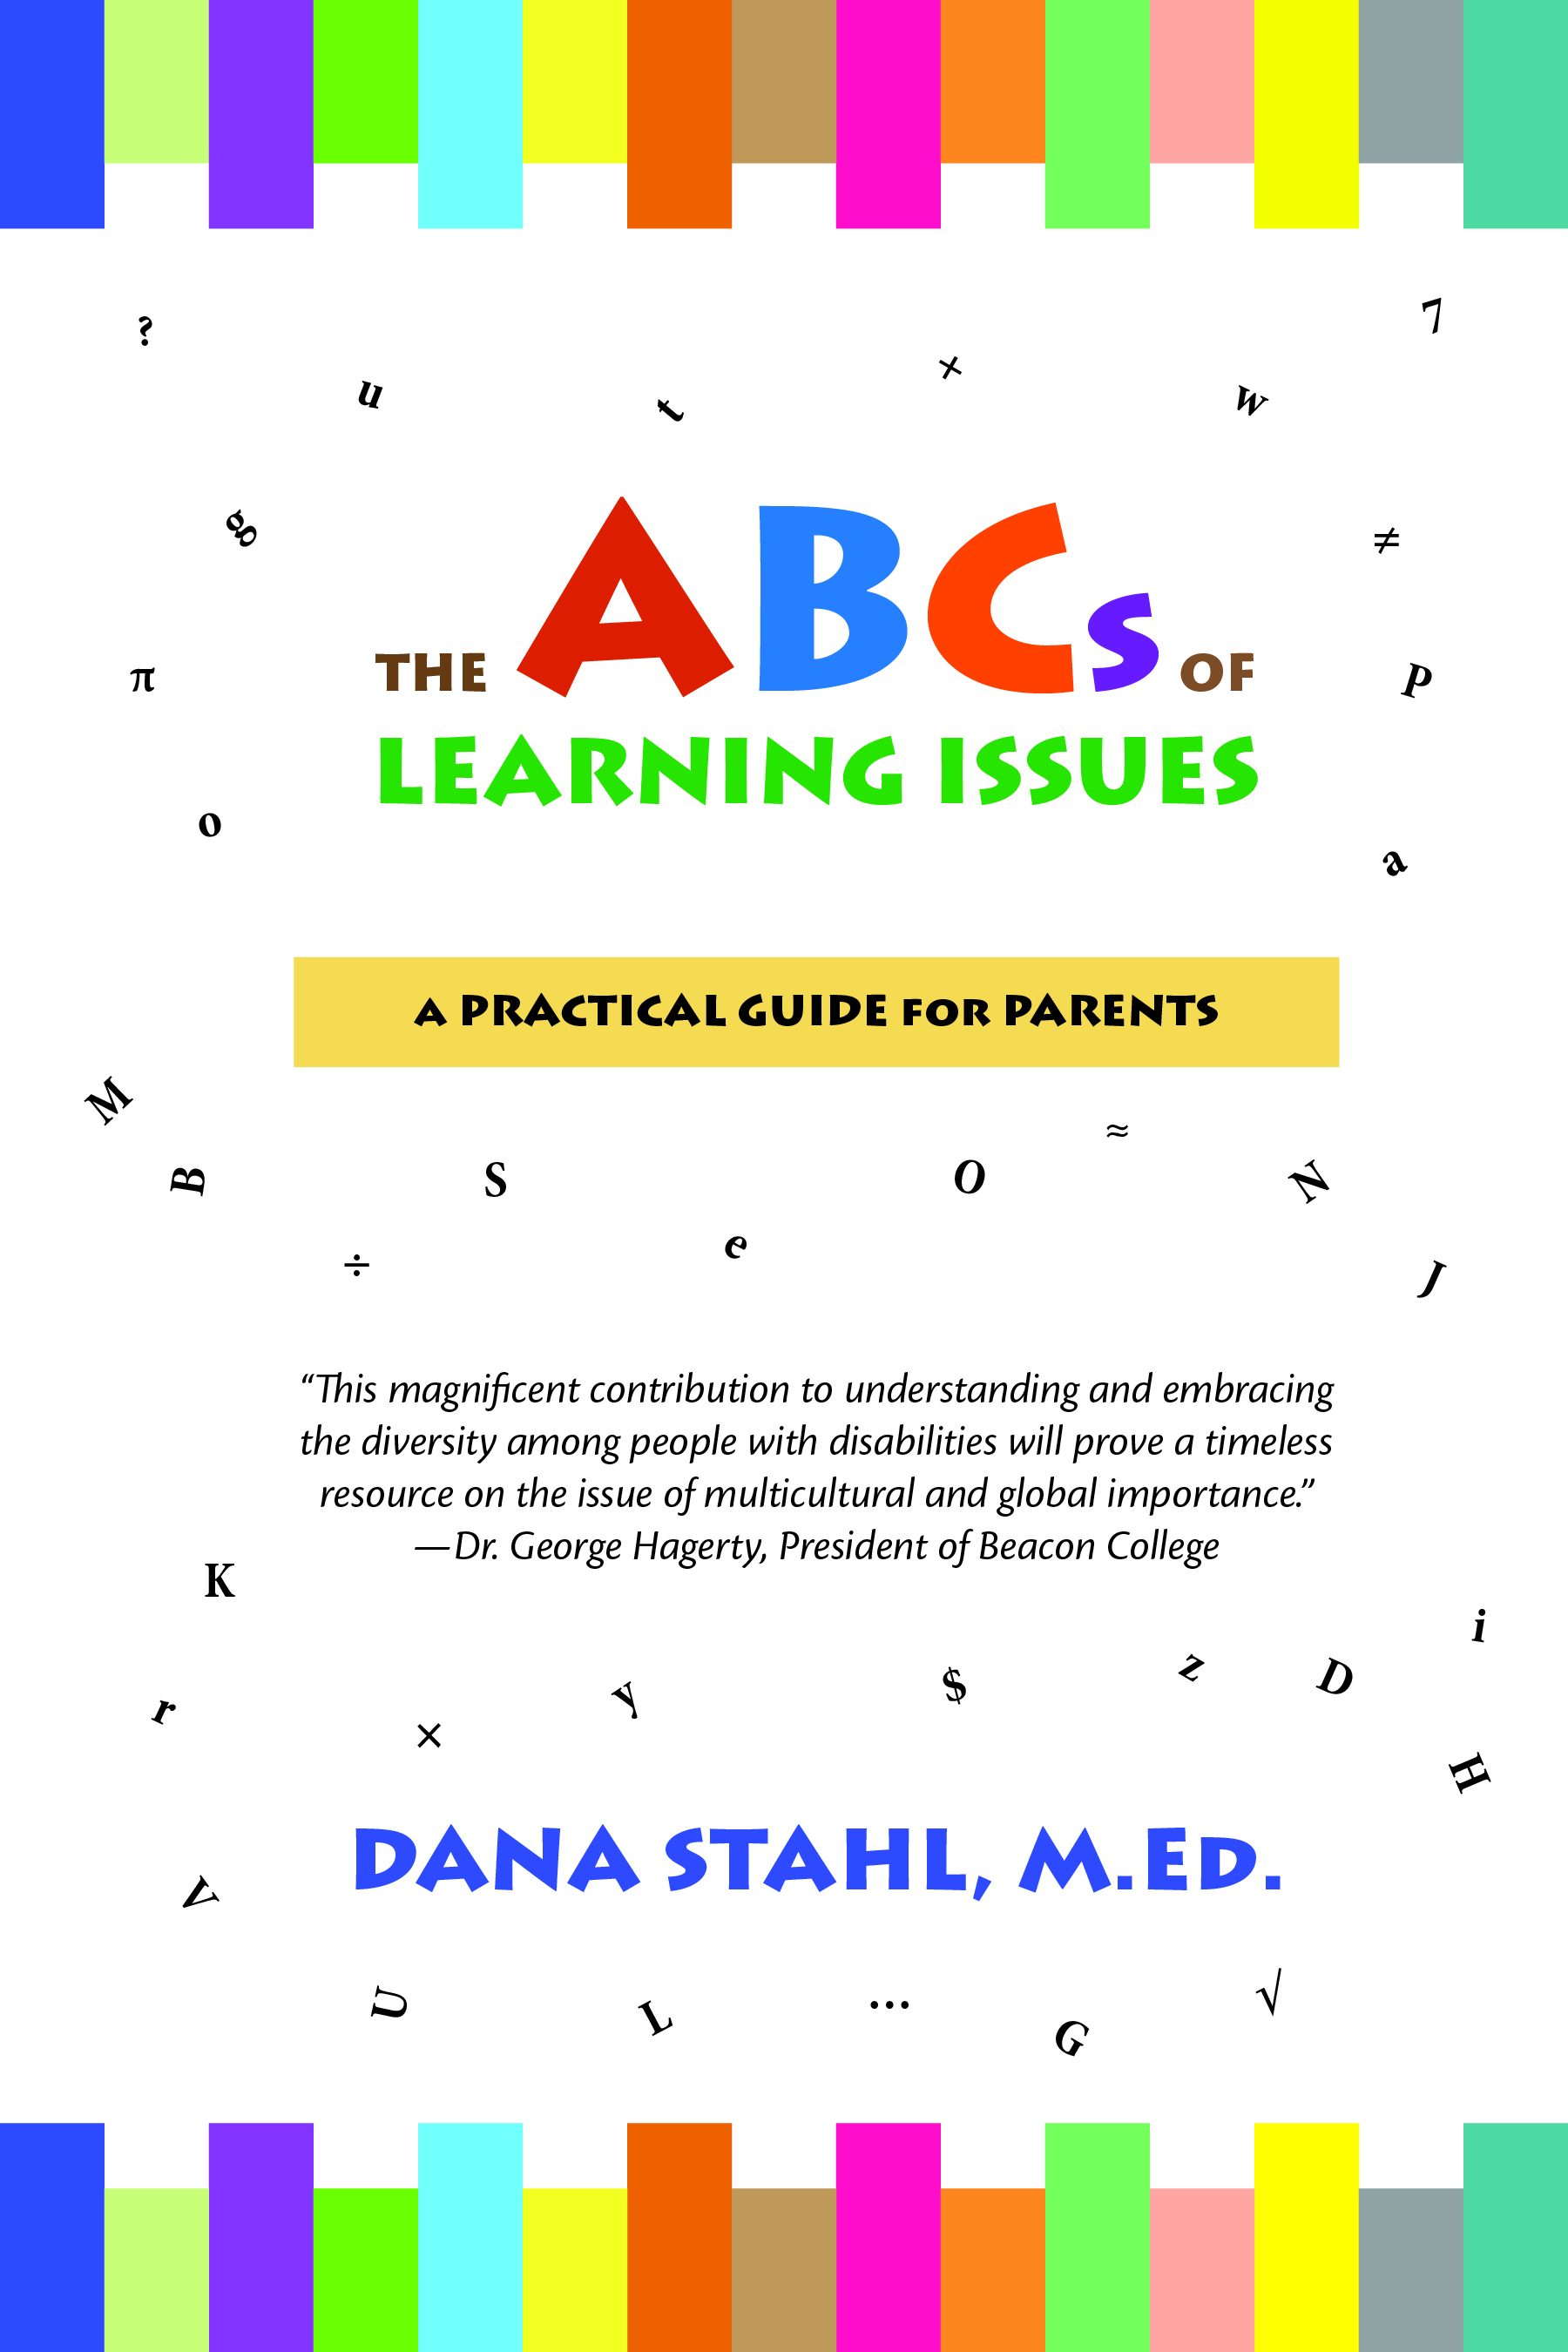 The ABCs of Learning Issues